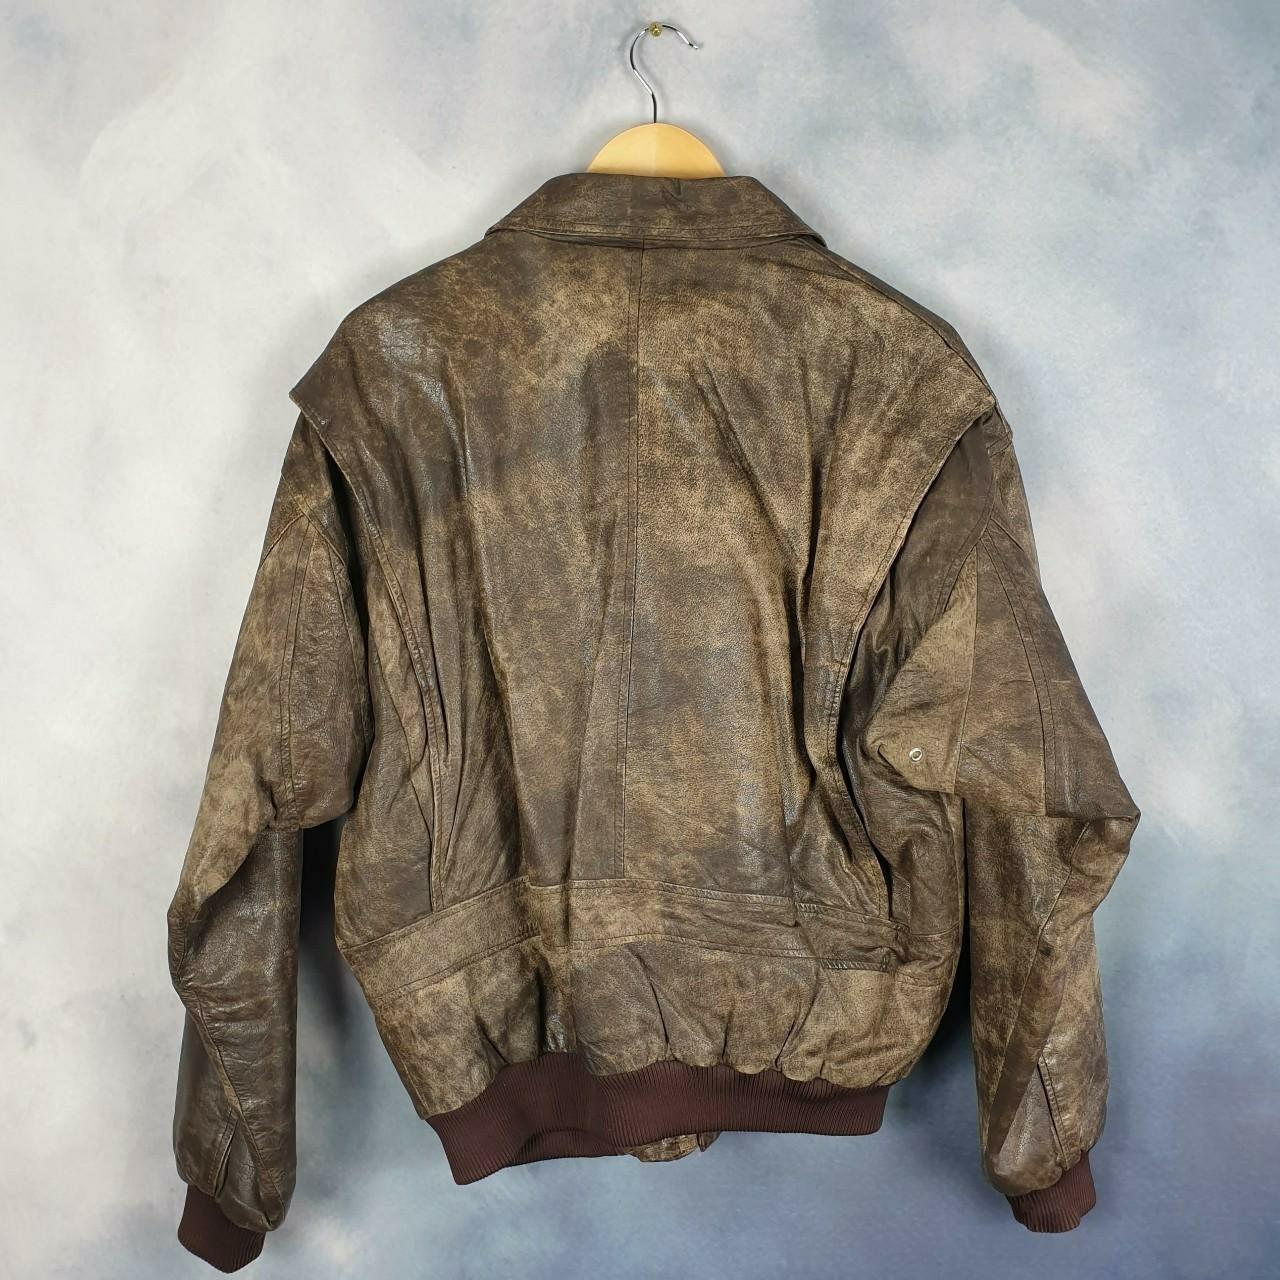 An awesome A-2 flight jacket coat in thick patina... - Depop